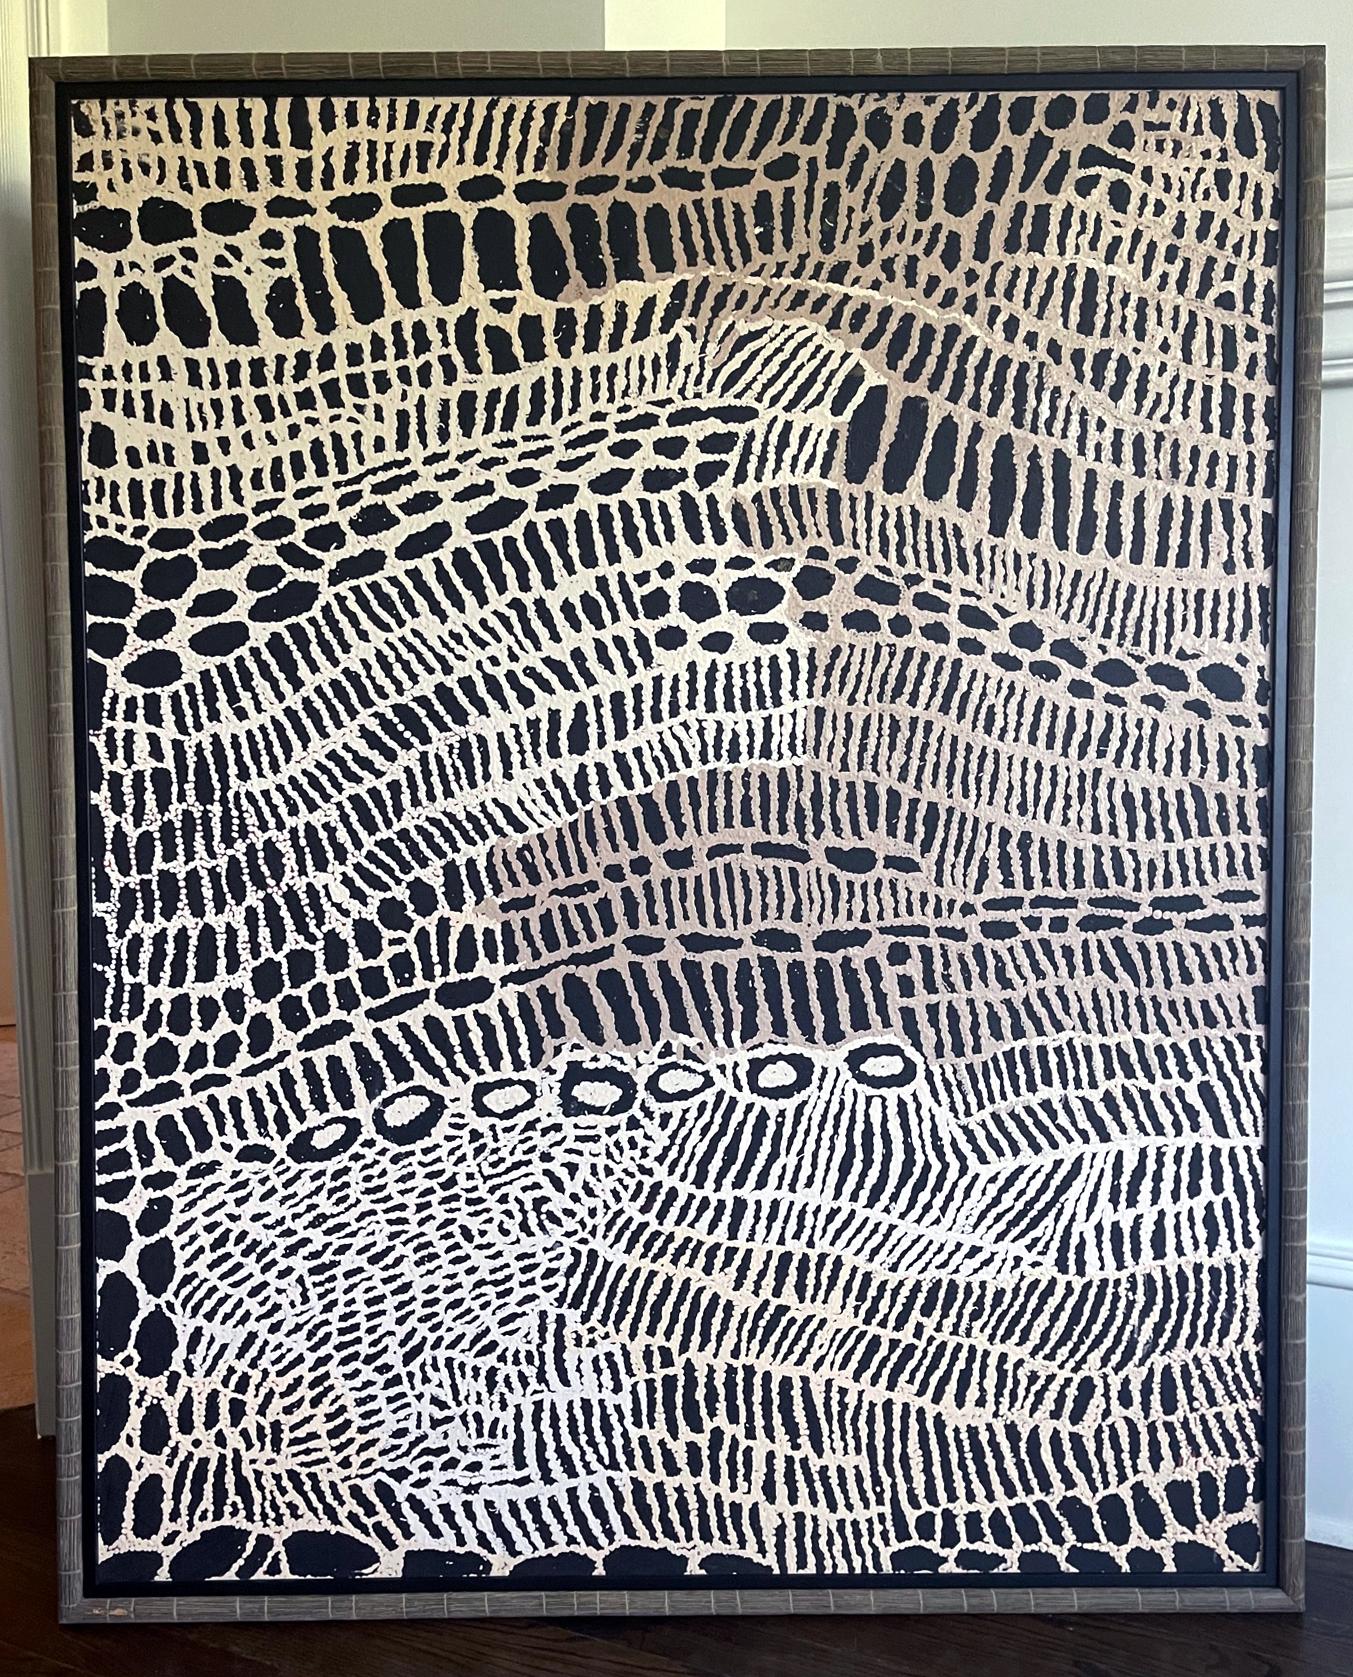 A stunning abstract painting by Australian Aboriginal artist Nyurapayia Nampitjinpa
(also known as Mrs. Bennett; 1935-2013). Entitled 